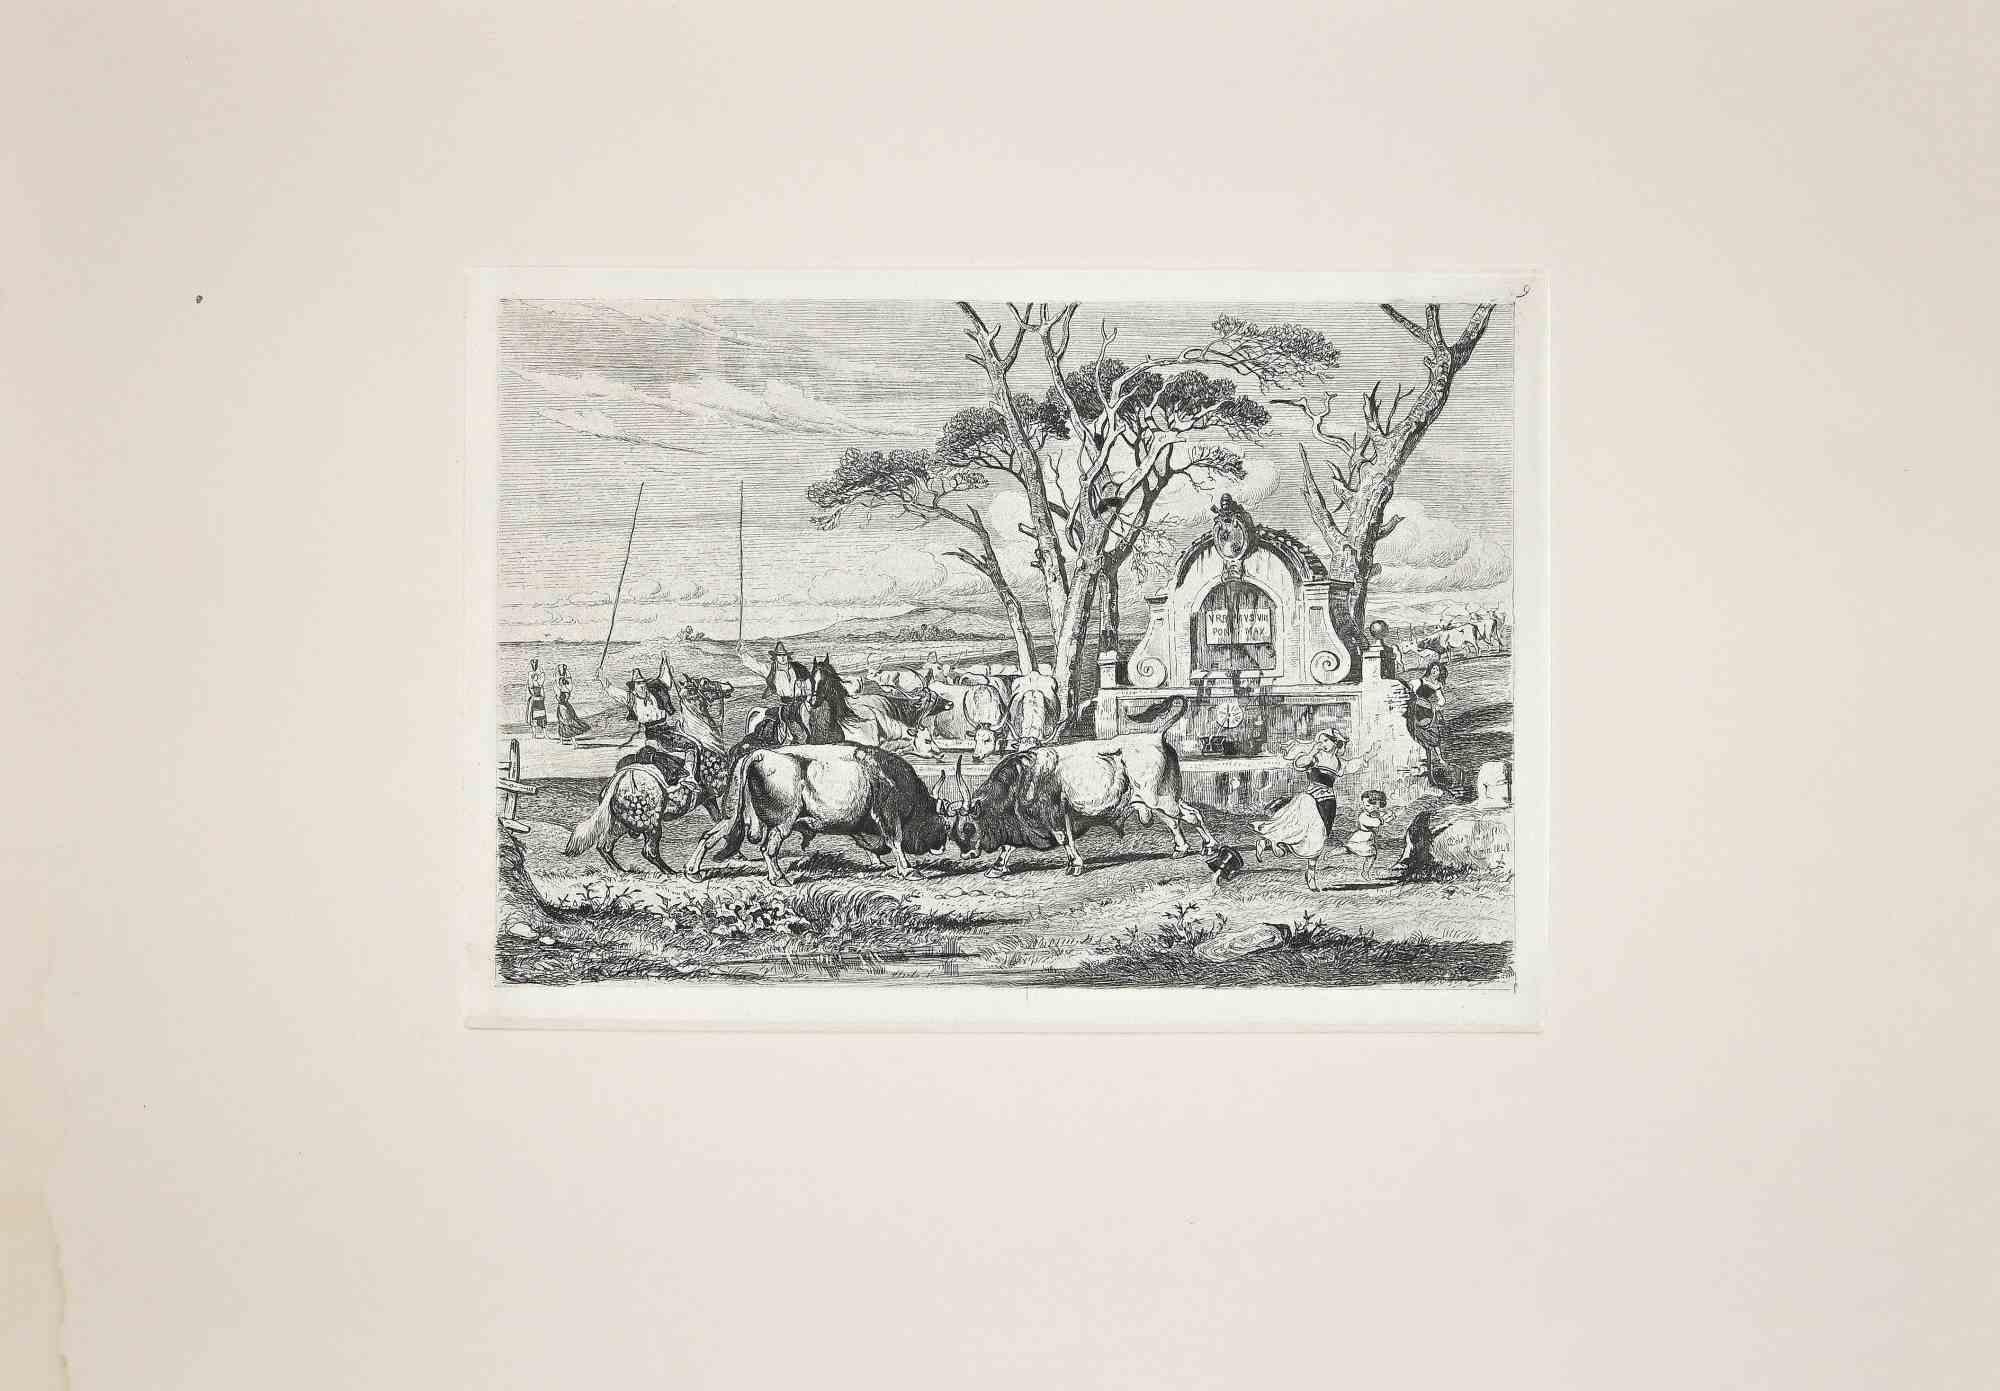 The bulls' fight in  Roman Countryside with the carriage is an original etching artwork realized after Charles Coleman (1807, Yorkshire - 1874, Roma) in 1992.

Signed on the plate. The rare edition of only 25 copies.

Good condition with a minor